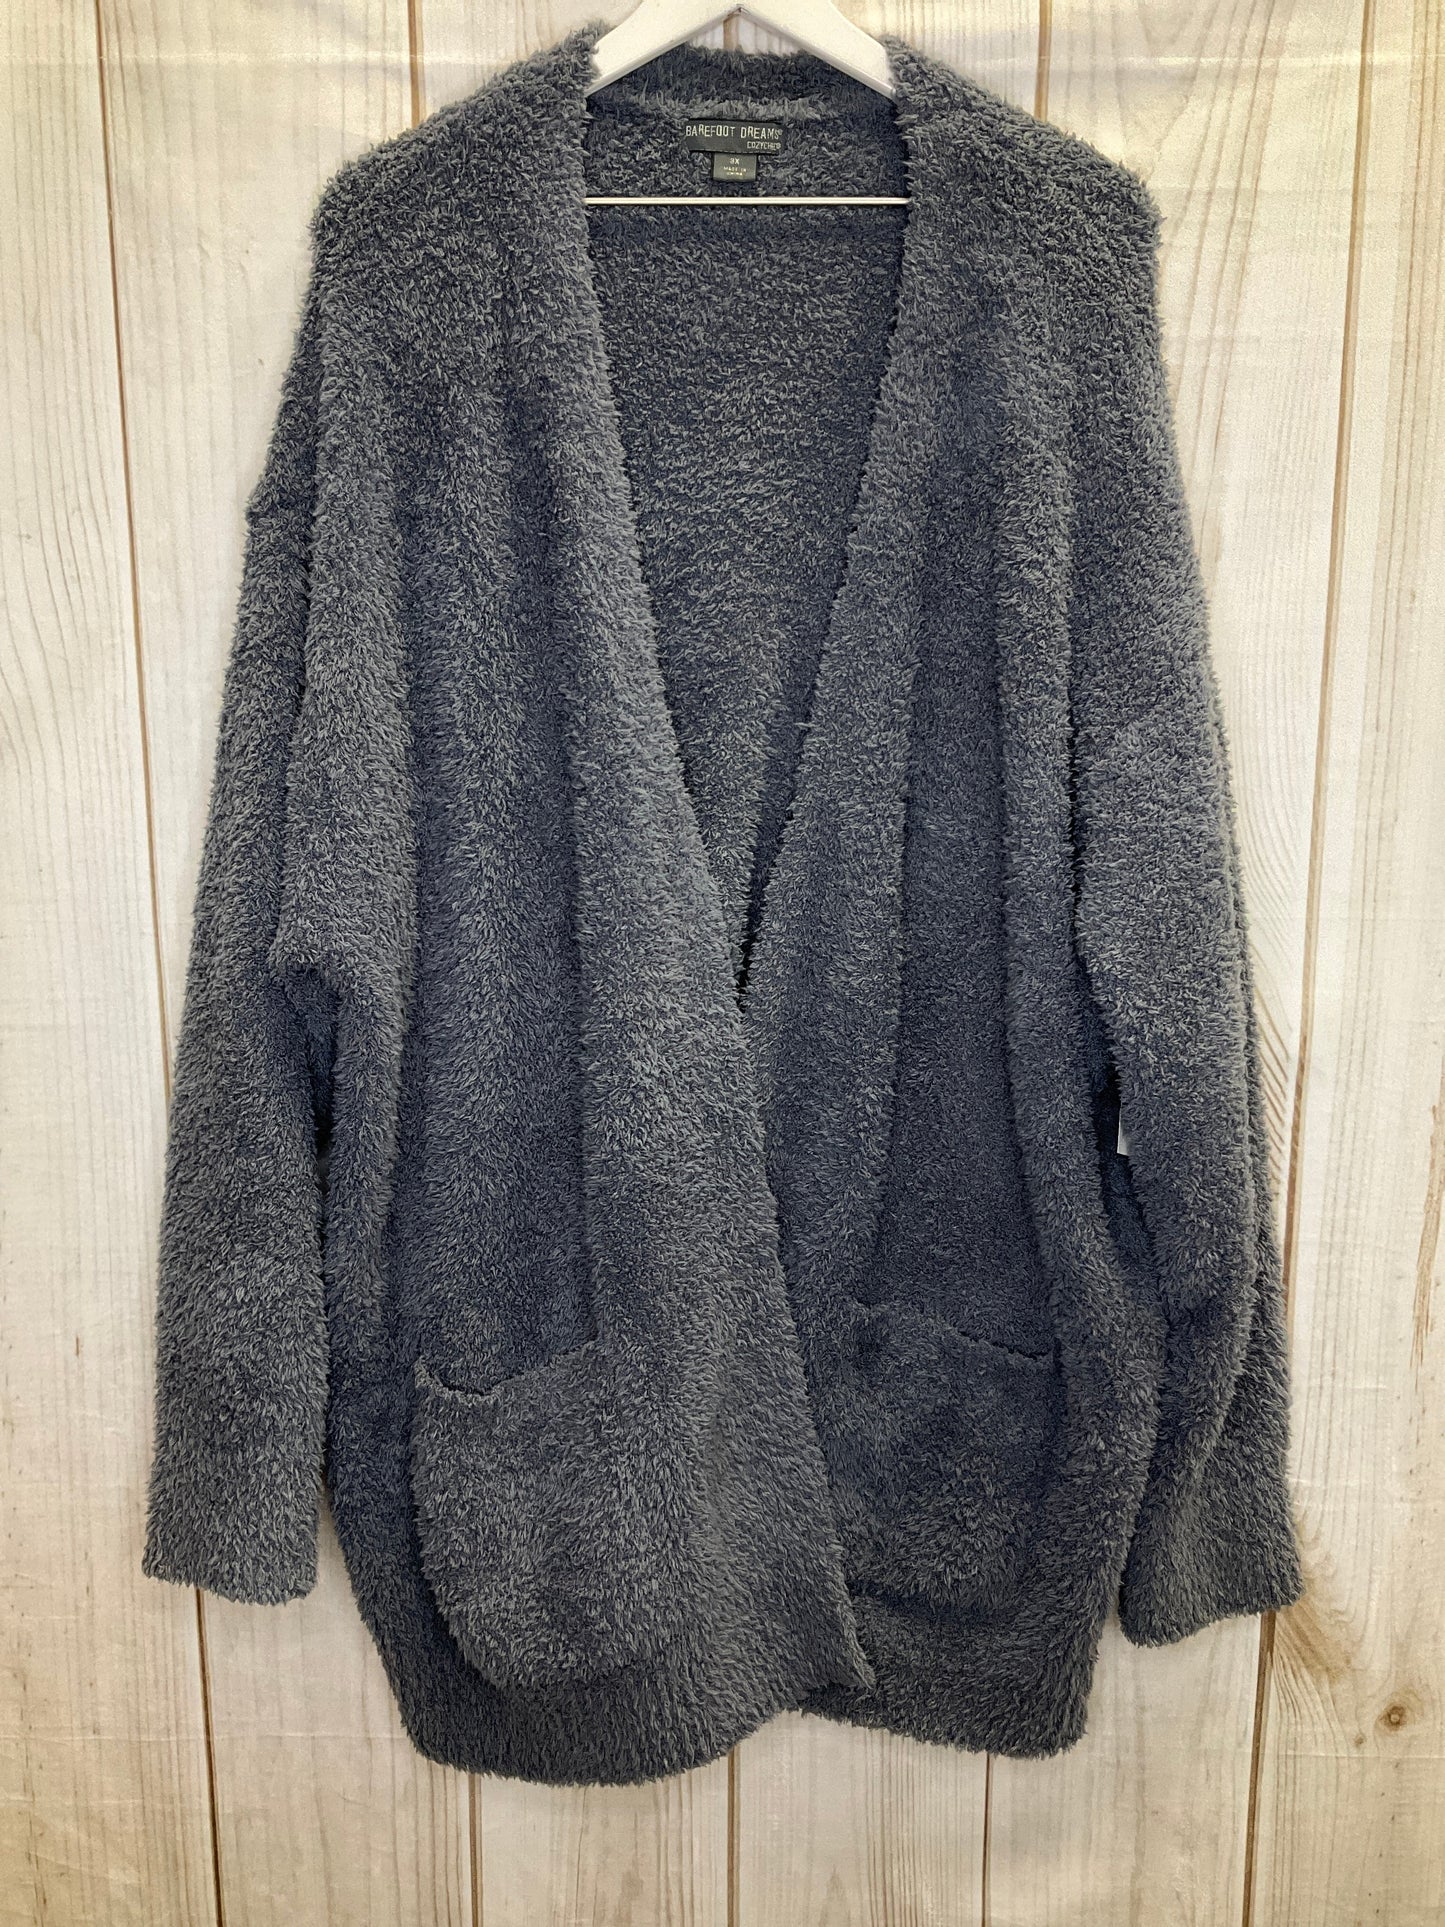 Sweater Cardigan By Barefoot Dreams  Size: 3x